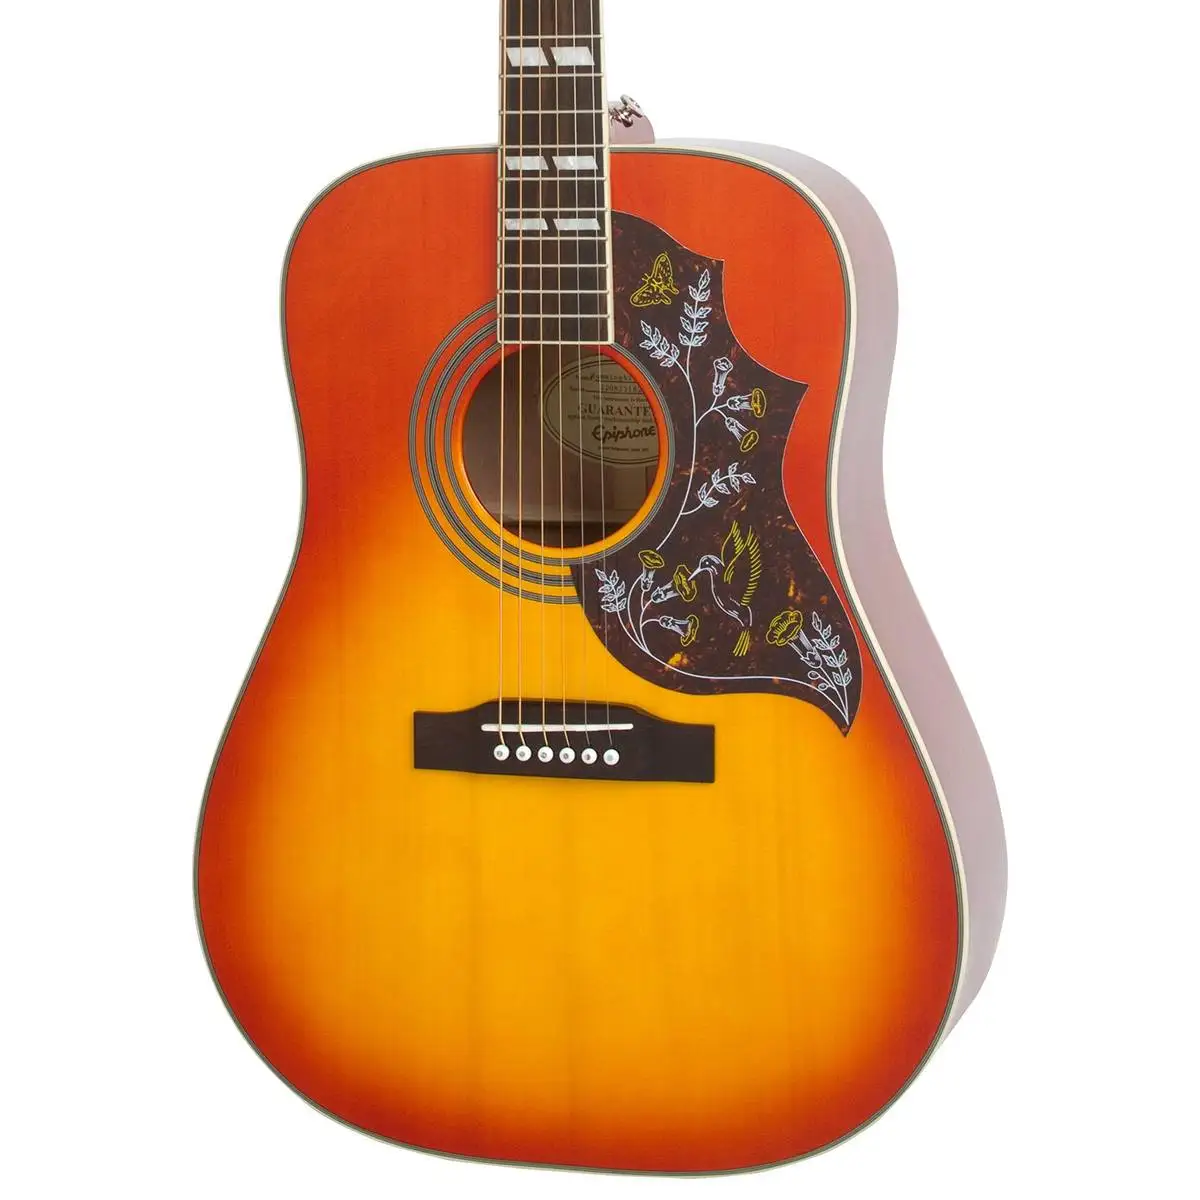 Epiphone Hummingbird Studio Acoustic-Electric Guitar Review: An Amplified, Rich Tone